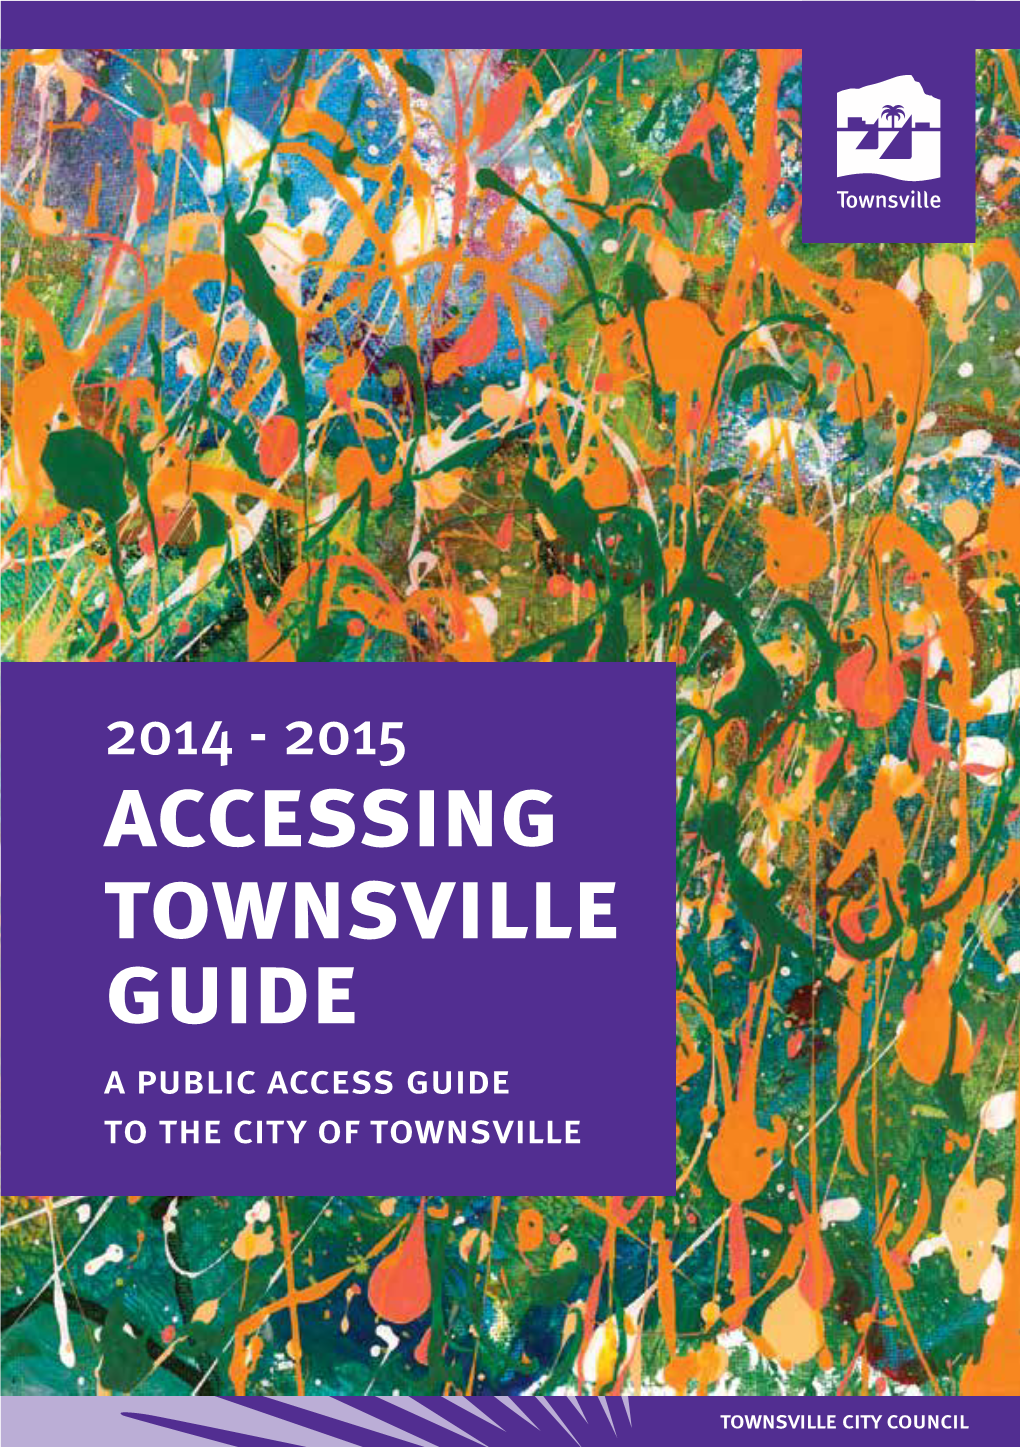 Accessing Townsville Guide a Public Access Guide to the City of Townsville Cover Image >> Wildflowers by Le-Anne Williams